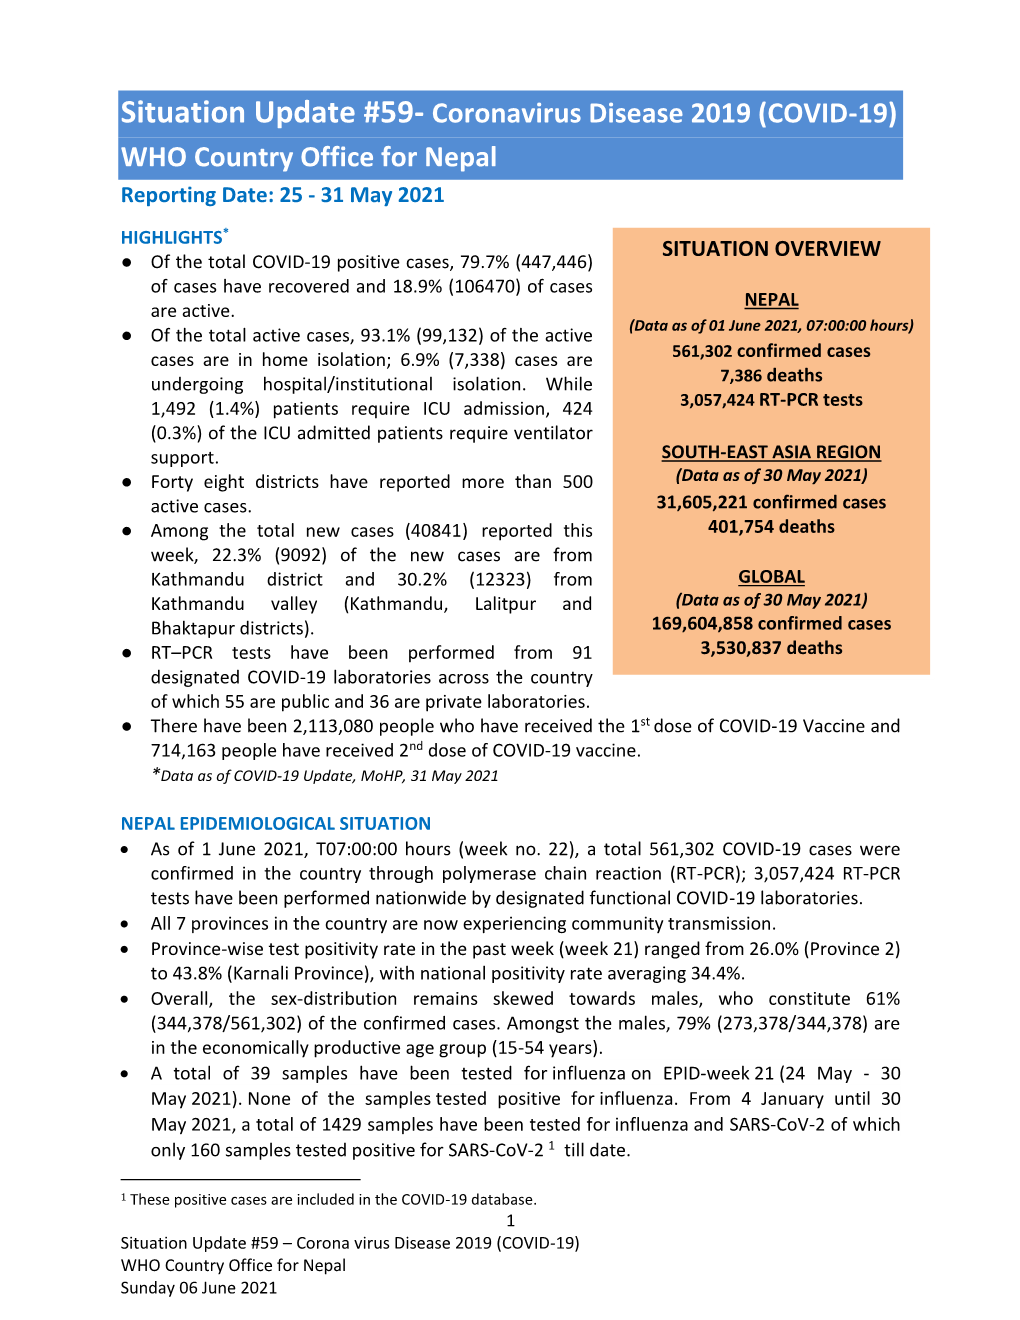 Situation Update #59- Coronavirus Disease 2019 (COVID-19) WHO Country Office for Nepal Reporting Date: 25 - 31 May 2021